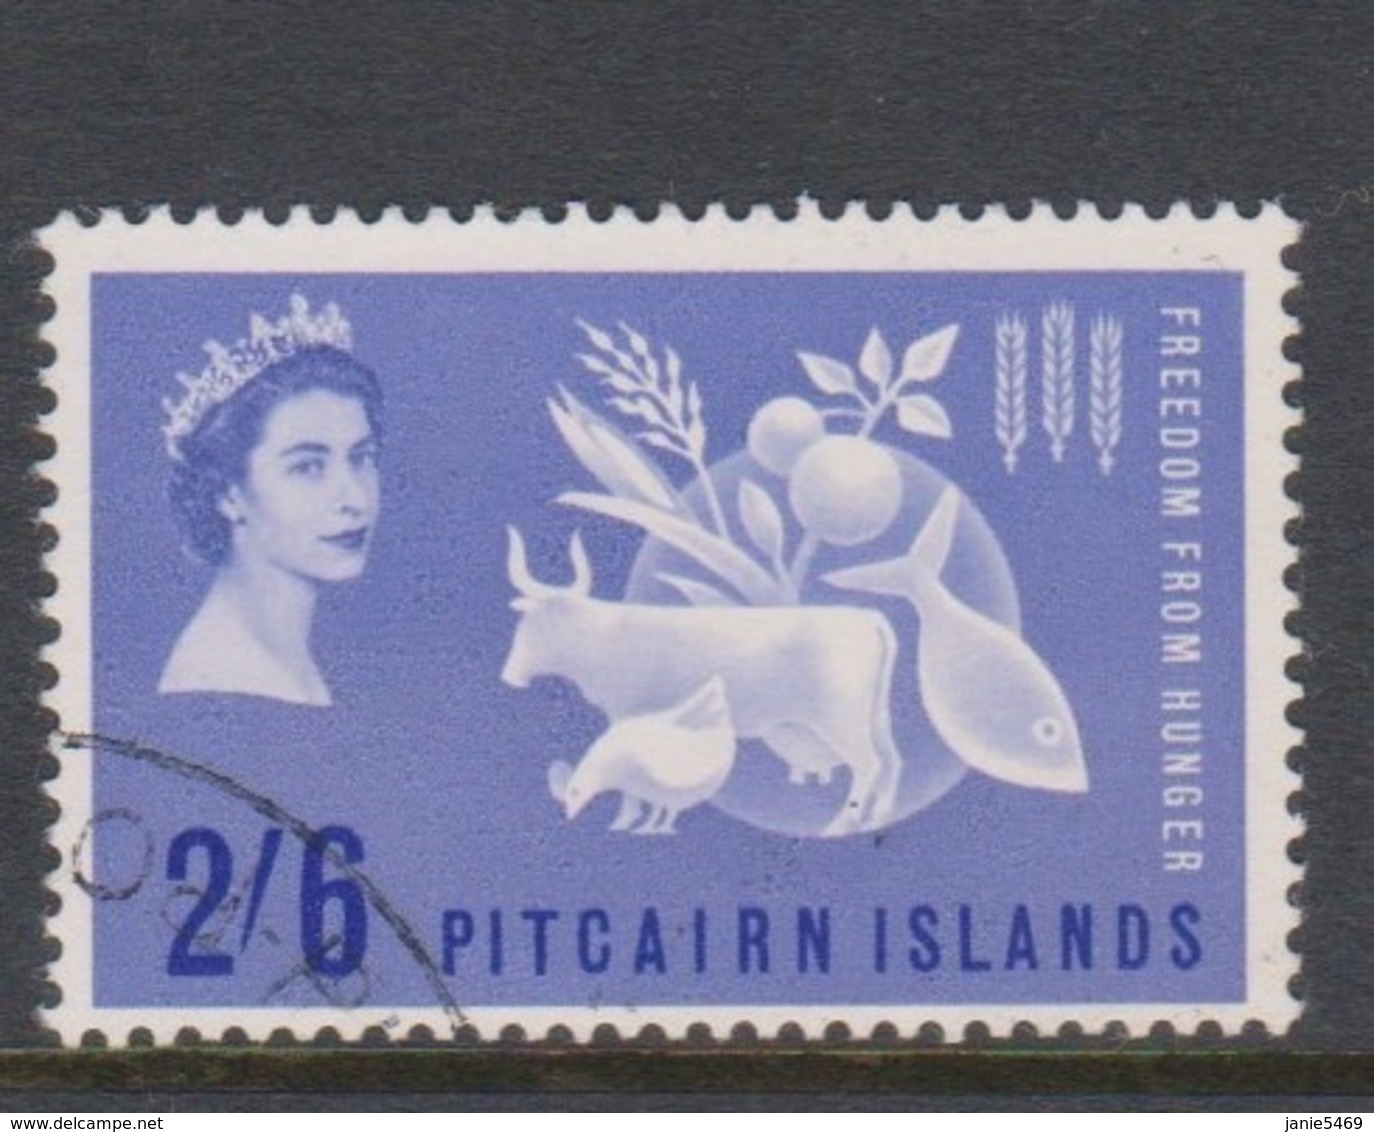 Pitcairn Islands  Scott 35 1963 Freedom From Hunger,Used - Pitcairn Islands